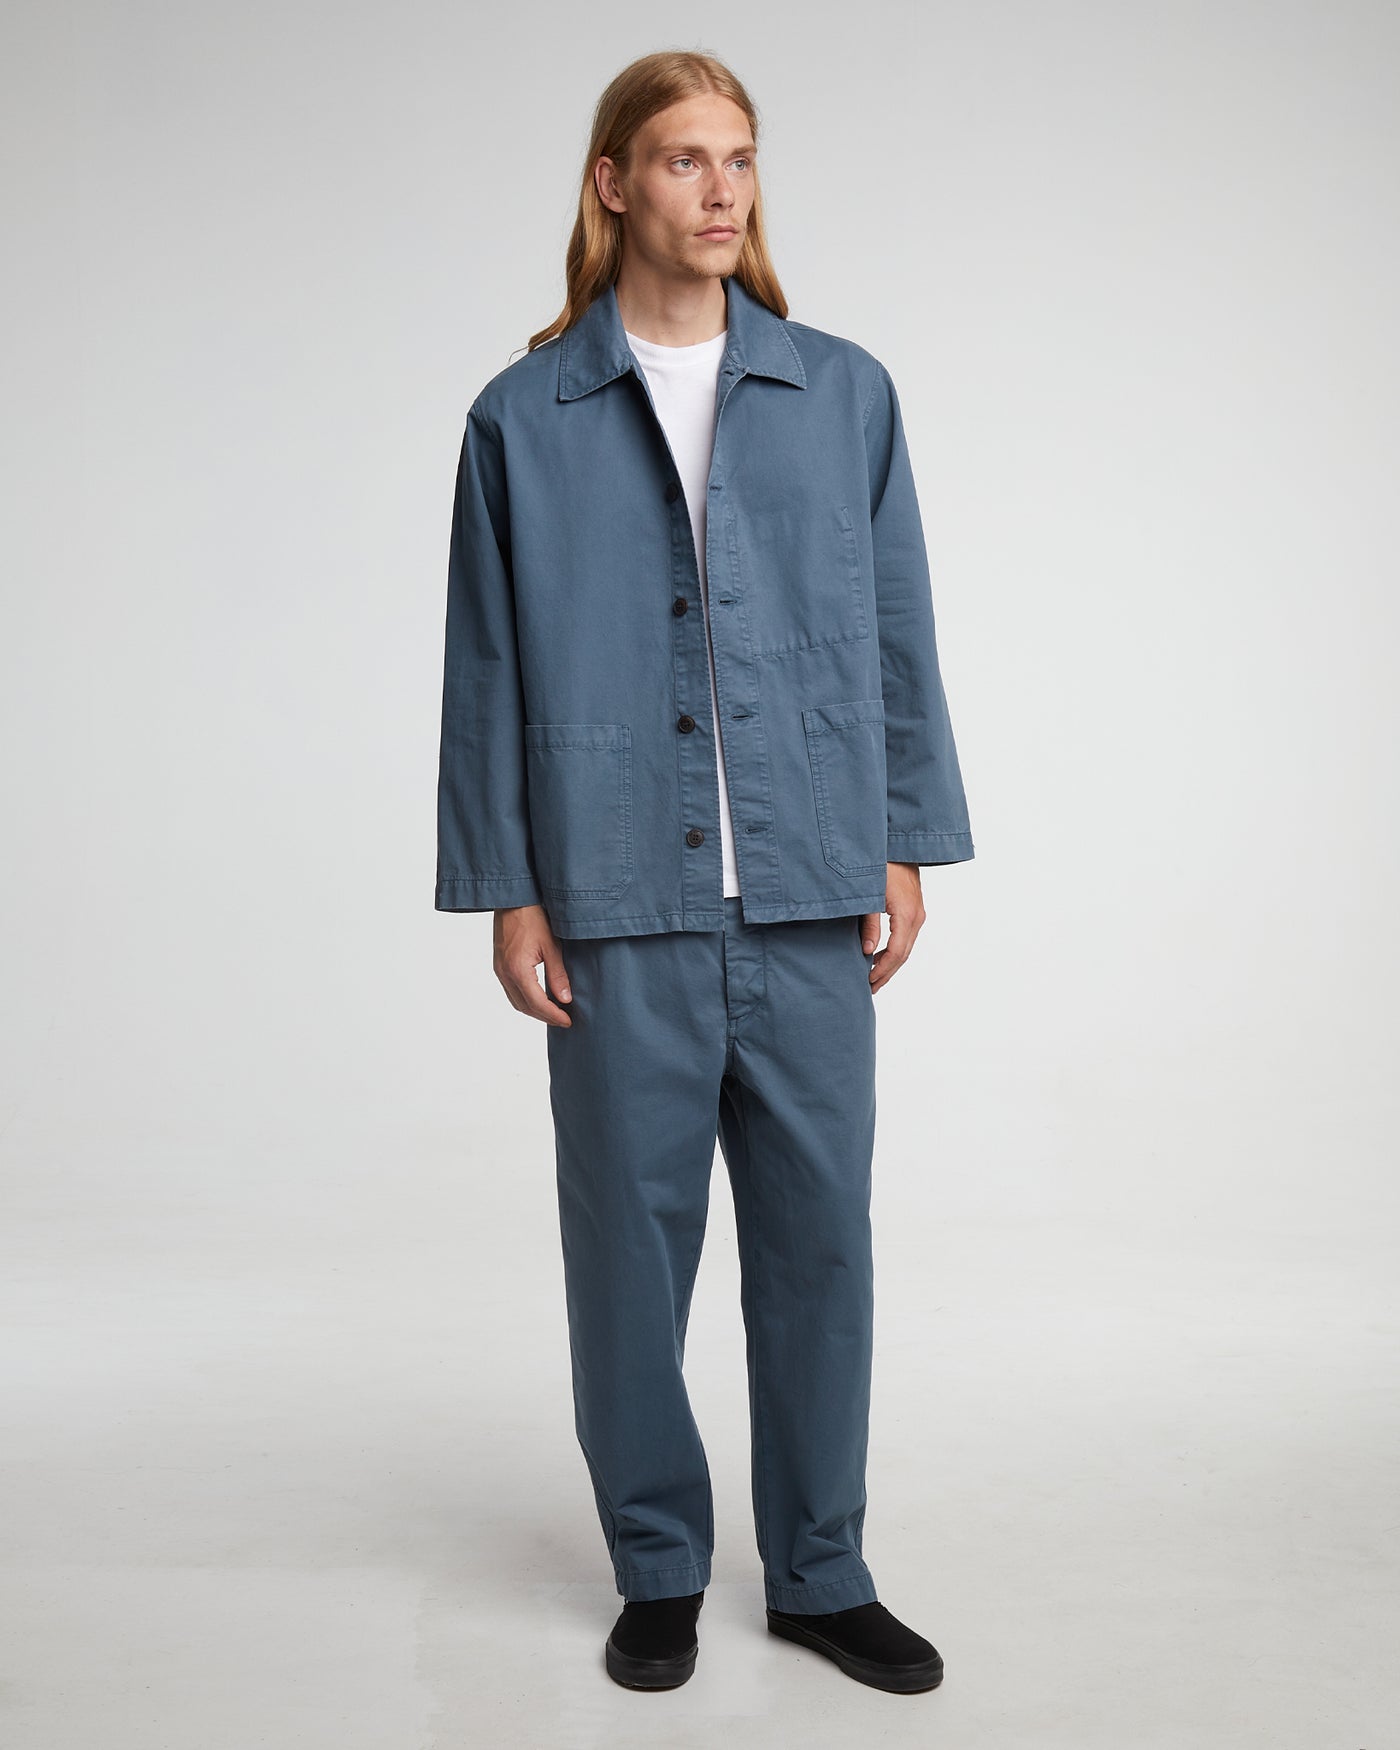 Coach Jacket Recycled Cotton Blue Mirage